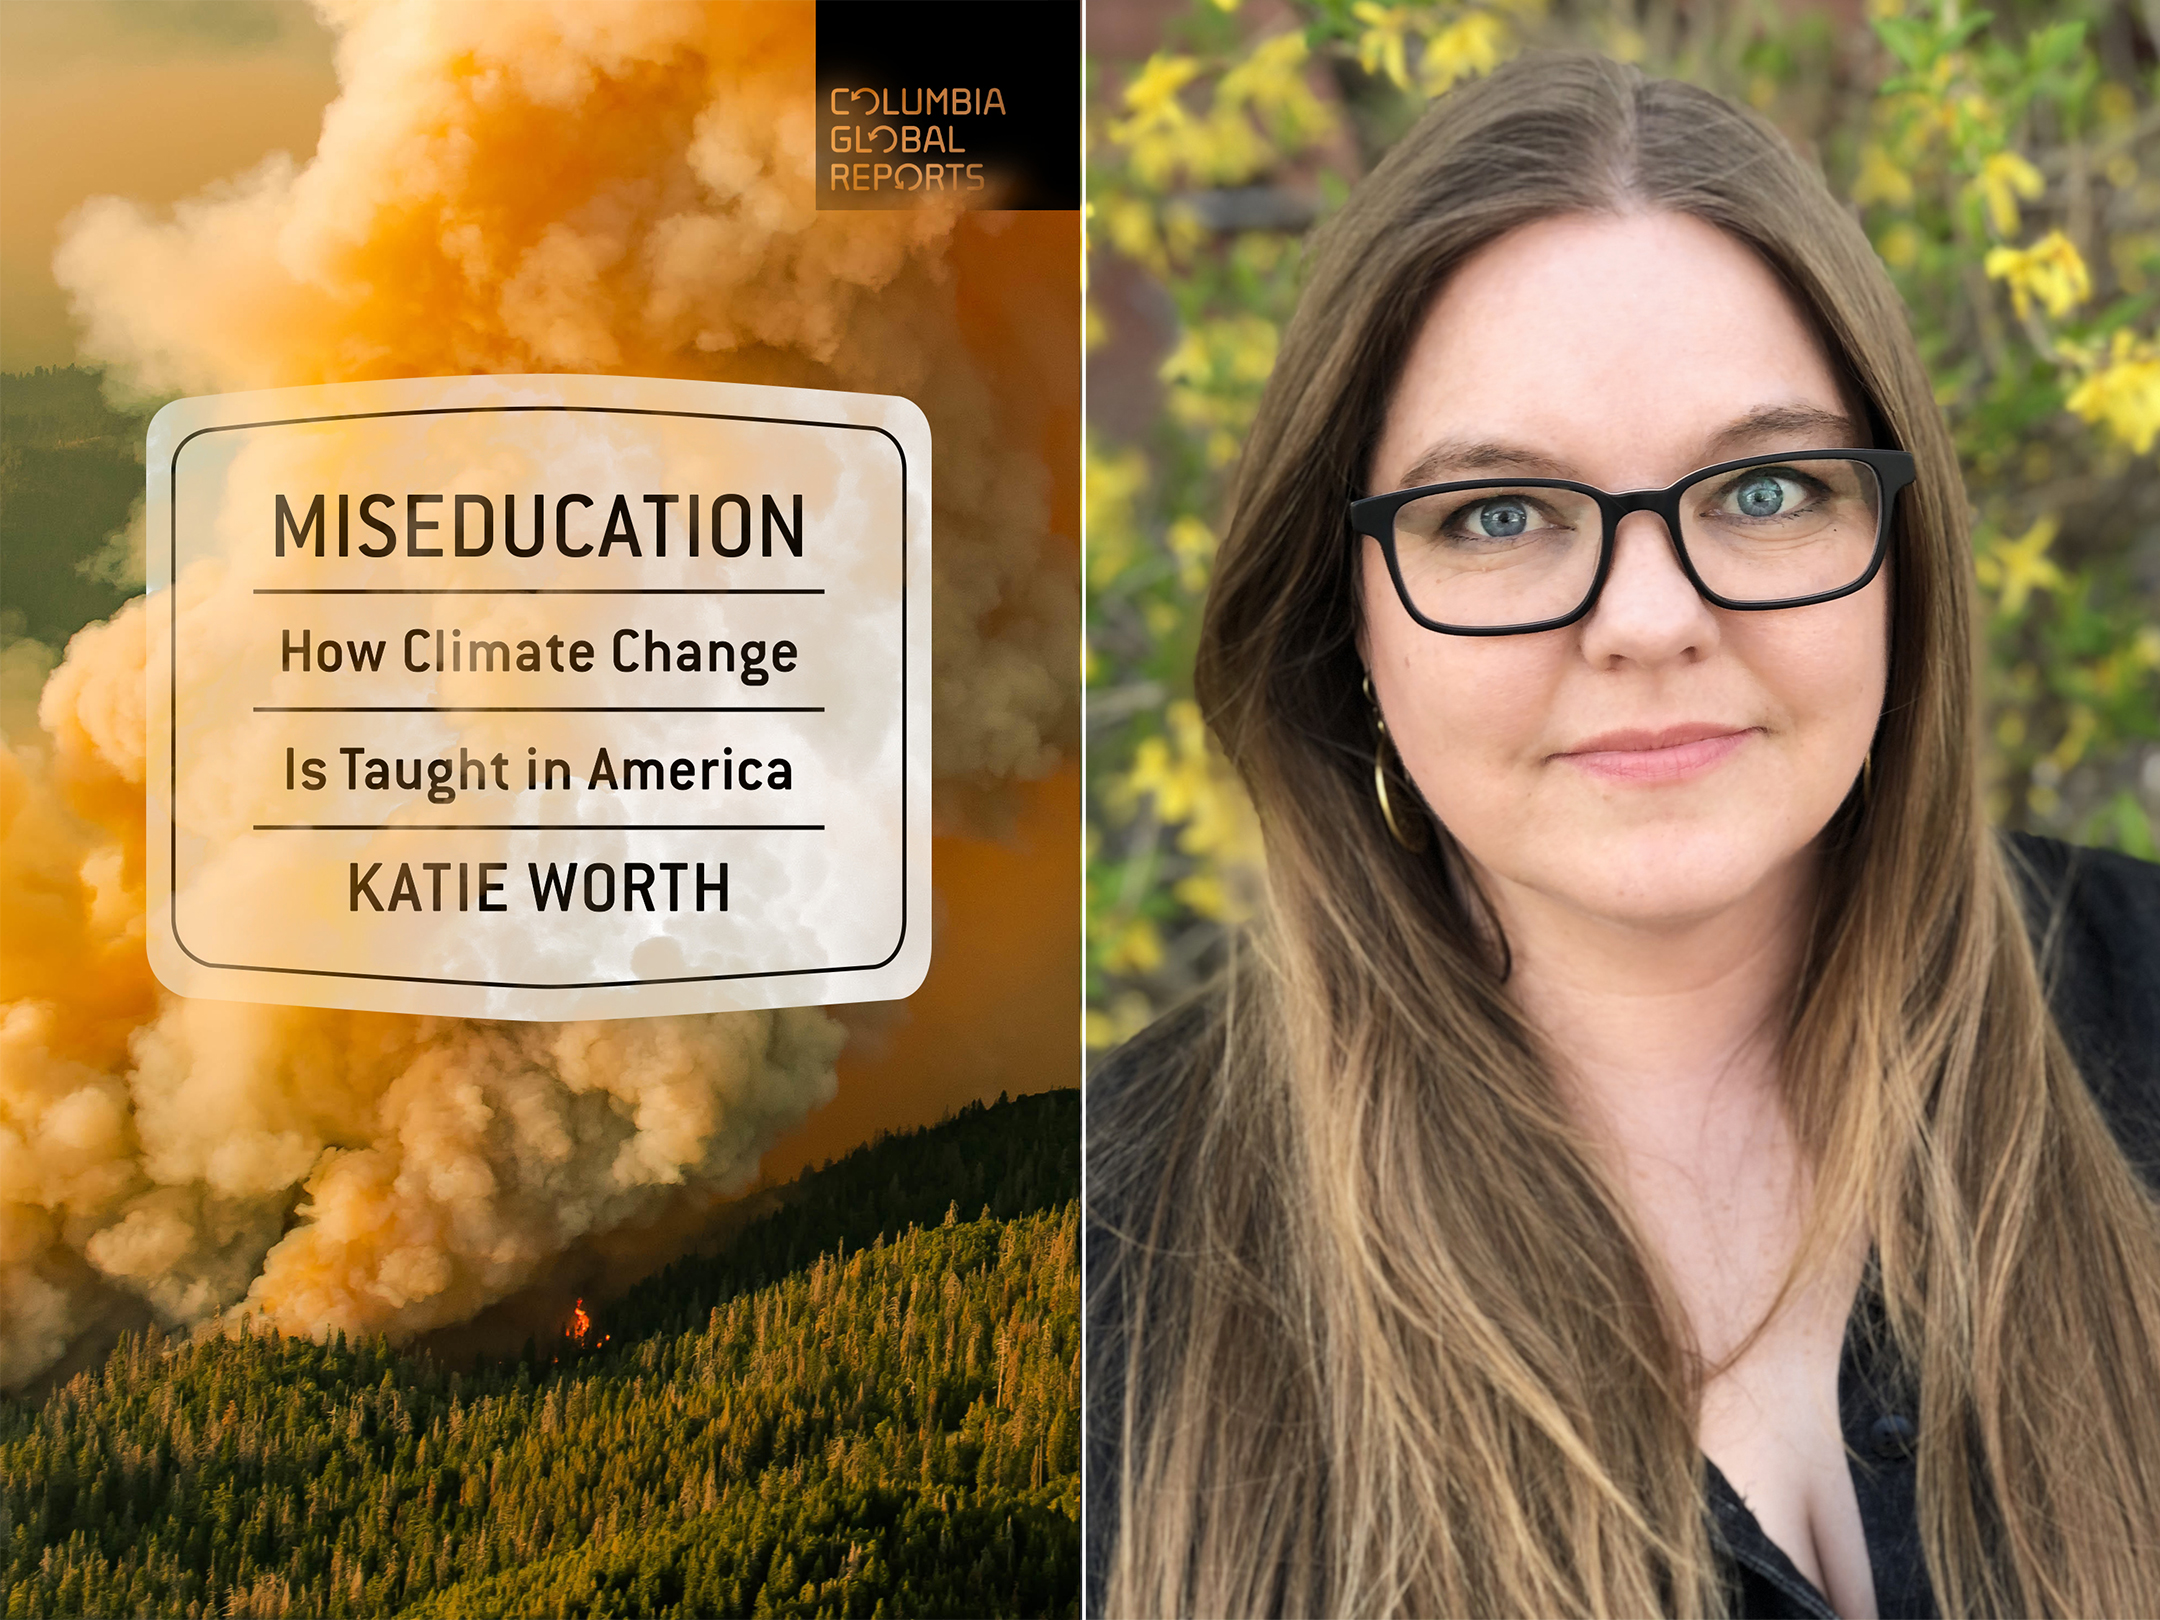 Cover of the book Miseducation: How Climate Change is Taught in America on the left, author photo of Katie Worth on the right